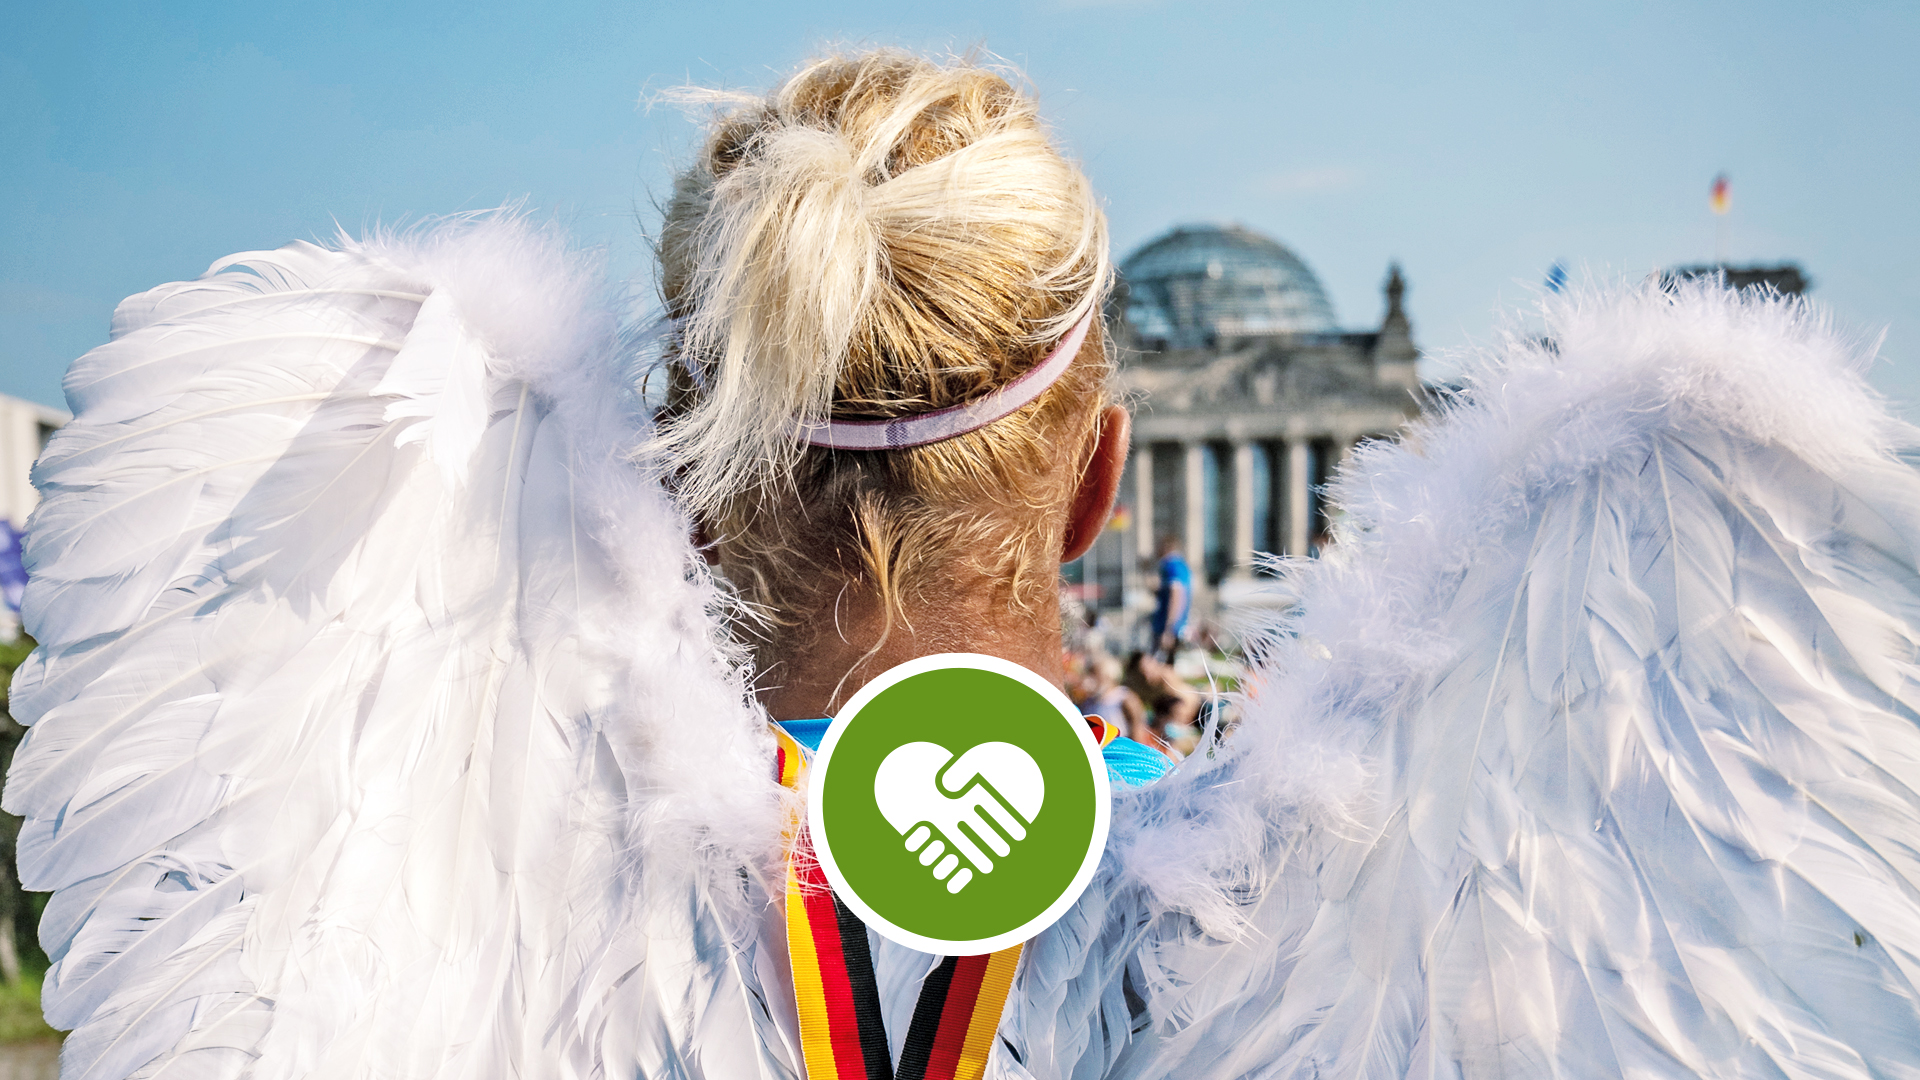 Participants become charity supporters with their run at the BMW BERLIN-MARATHON and turn the race into a true charity sporting event. Anyone can be an angel. ©camera4 (Tilo Wiedensohler) / SCC EVENTS